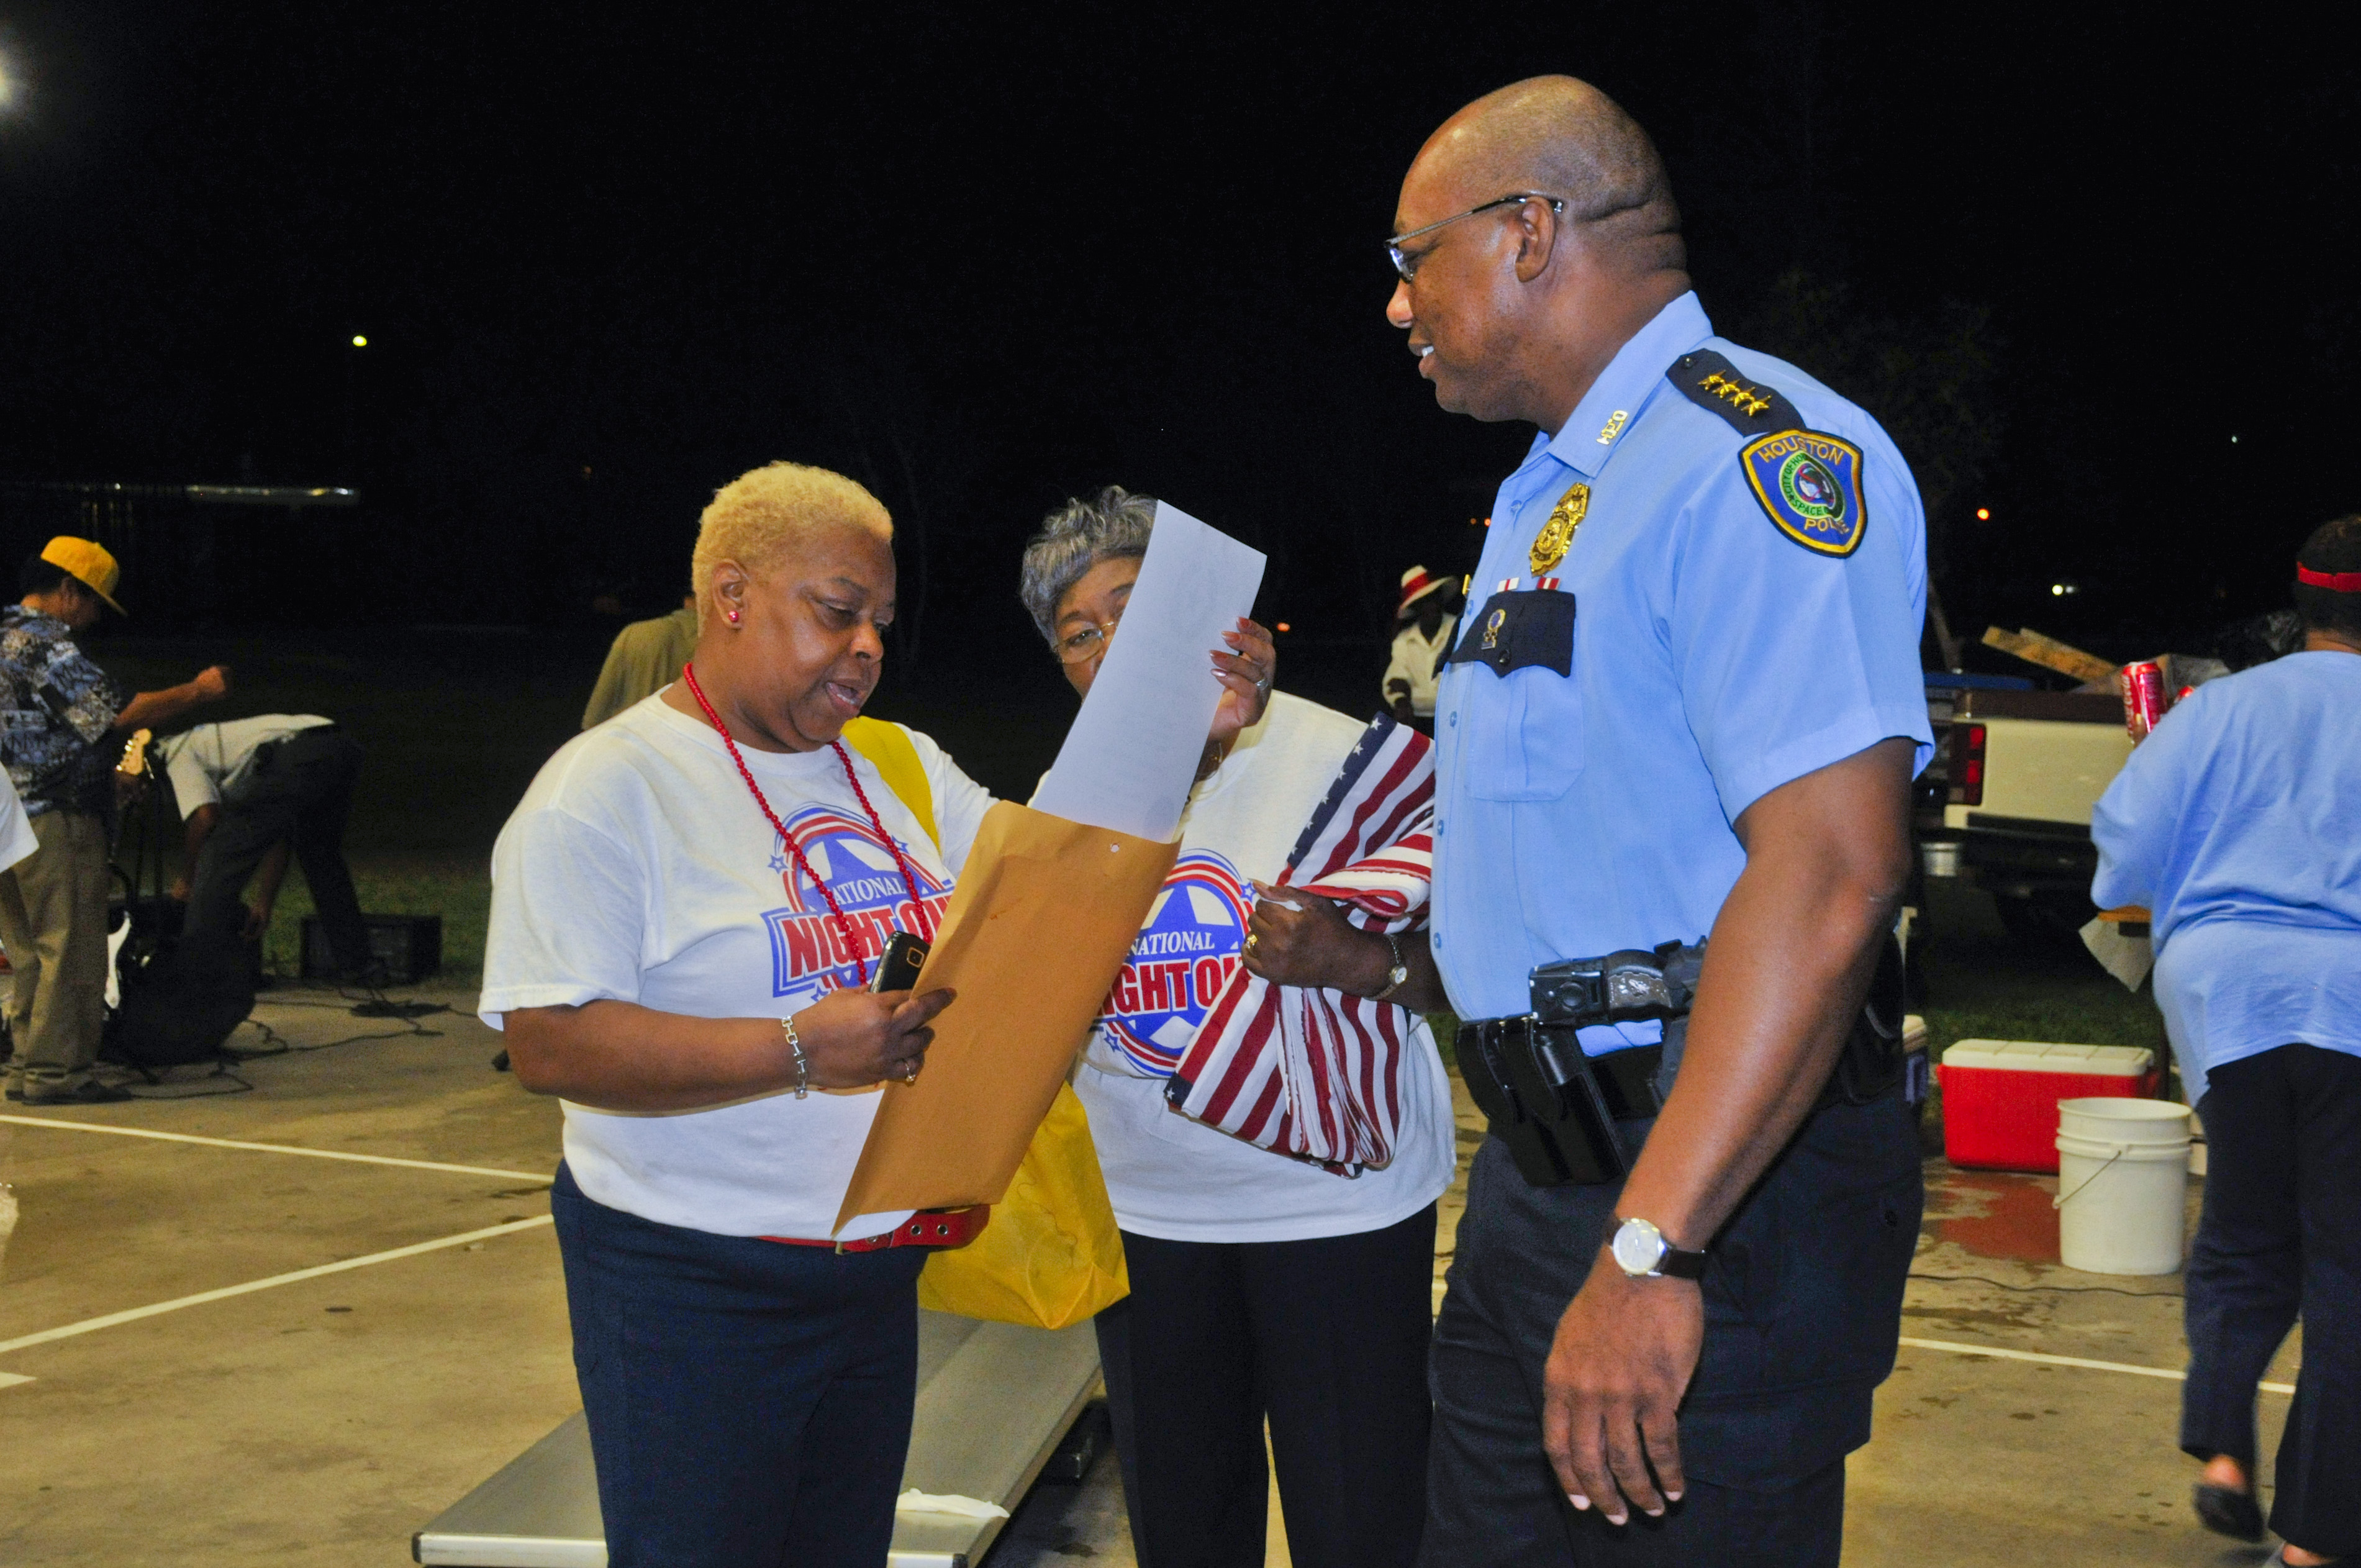 National Night Out event